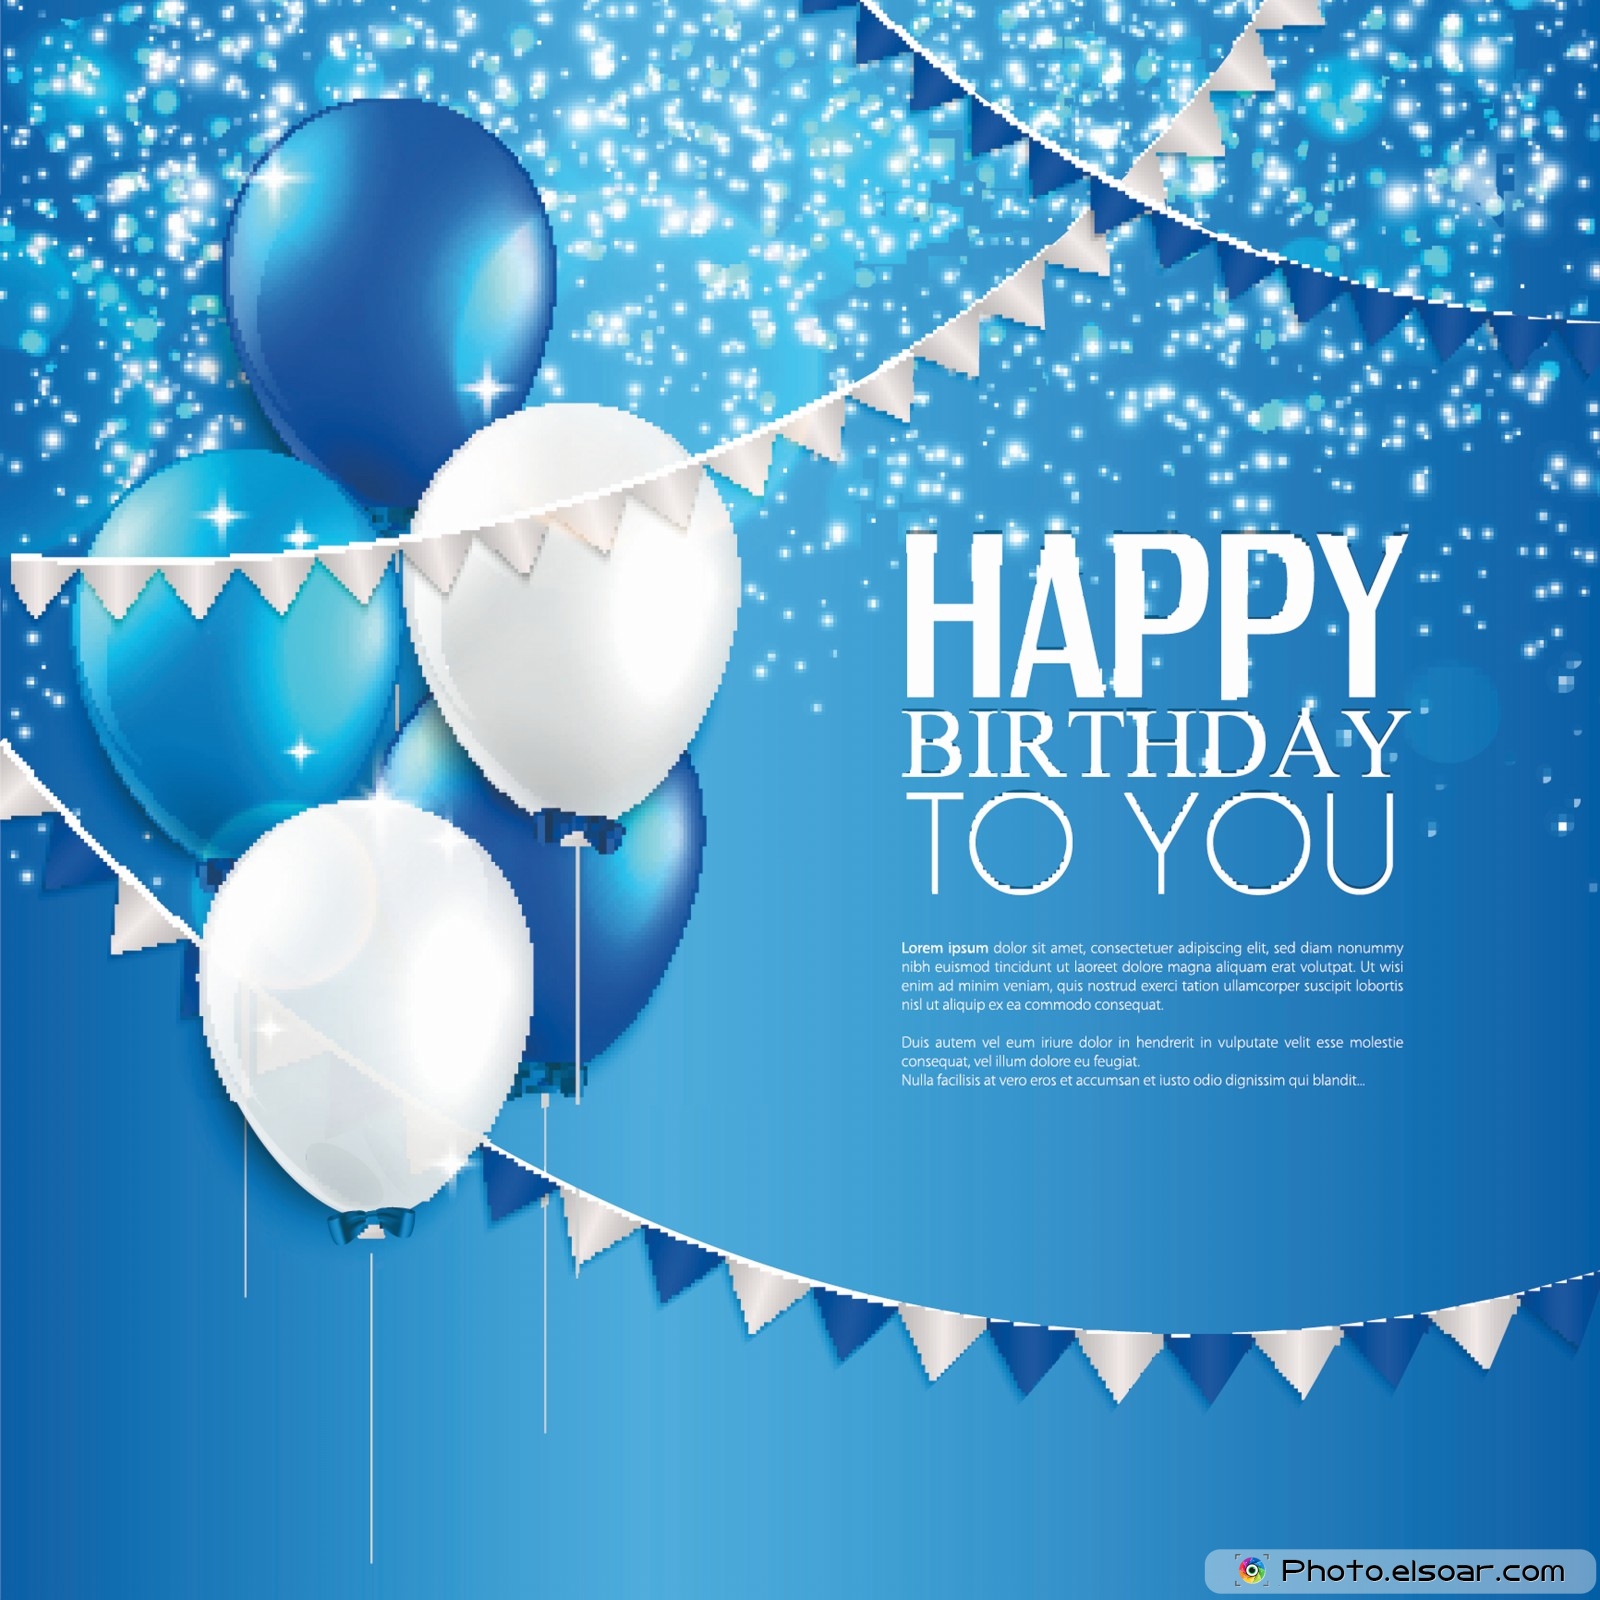 Free download Happy Birthday to you on a blue background with balloons [1600x1600] for your Desktop, Mobile & Tablet. Explore Happy Birthday Wallpaper for Men. Happy Birthday Desktop Wallpaper